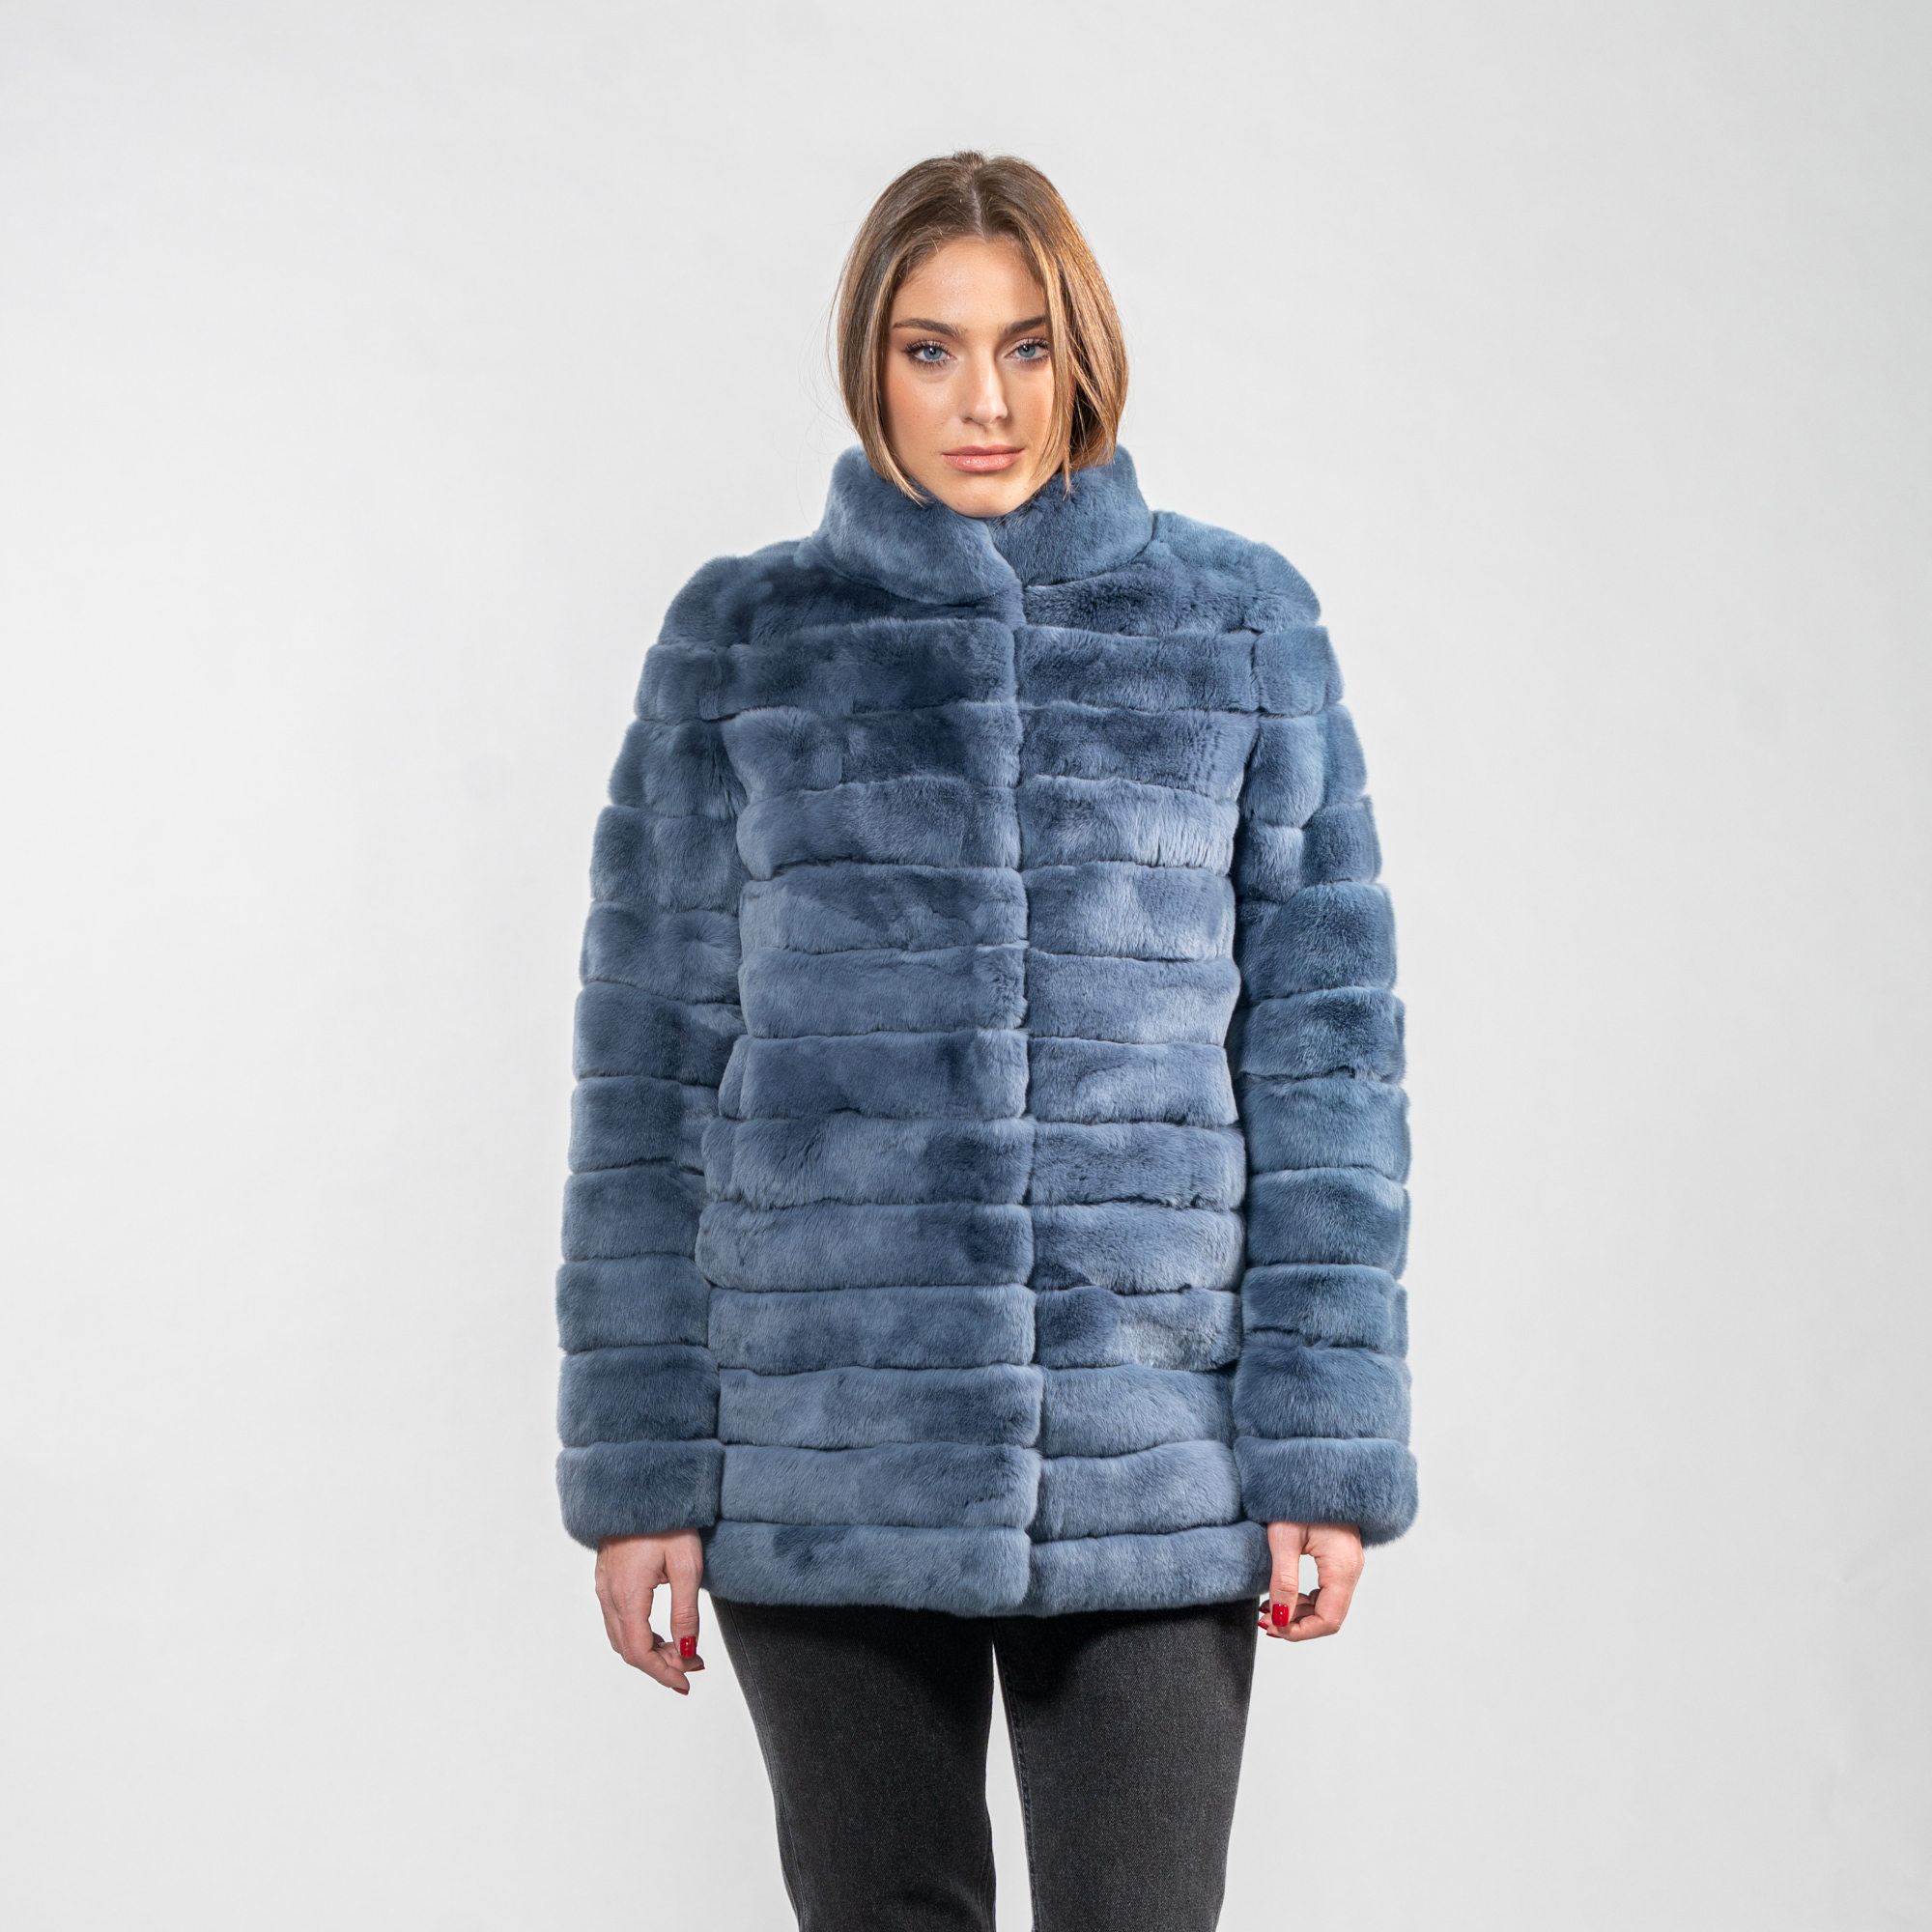 Rabbit fur jacket with a collar in blue color